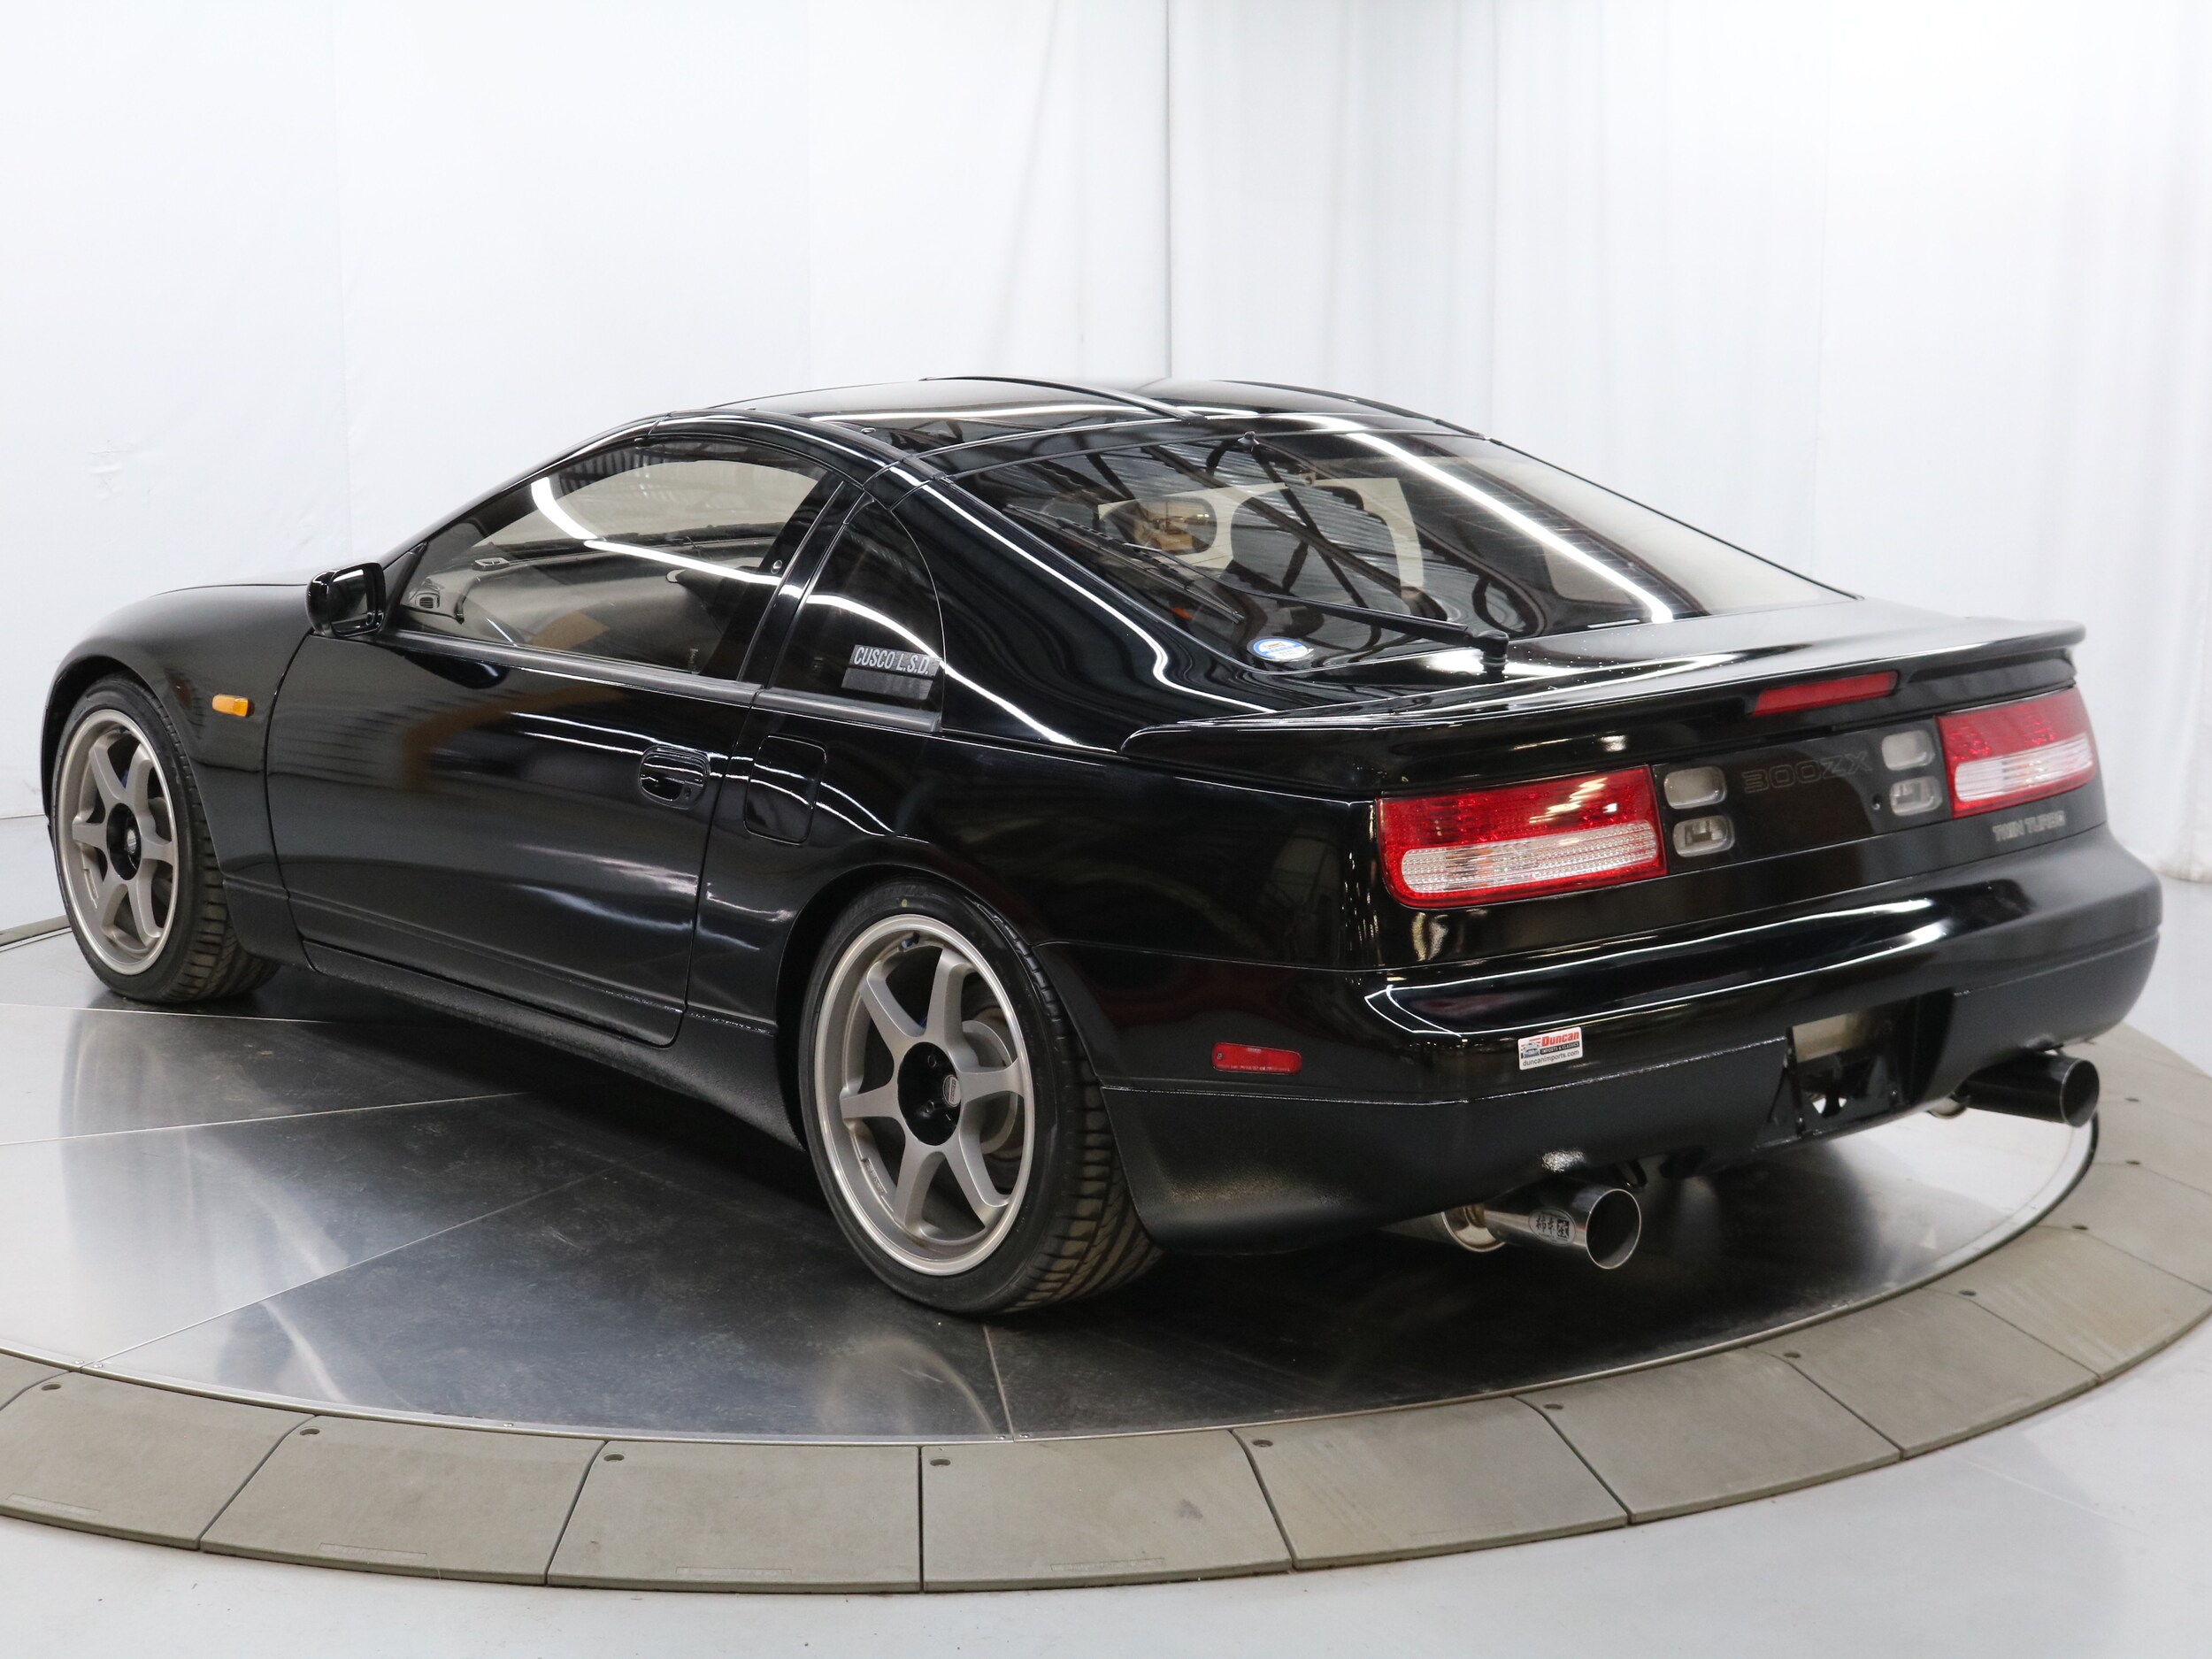 Used 1992 Nissan Fairlady Z 300ZX For Sale at Duncan Imports and 